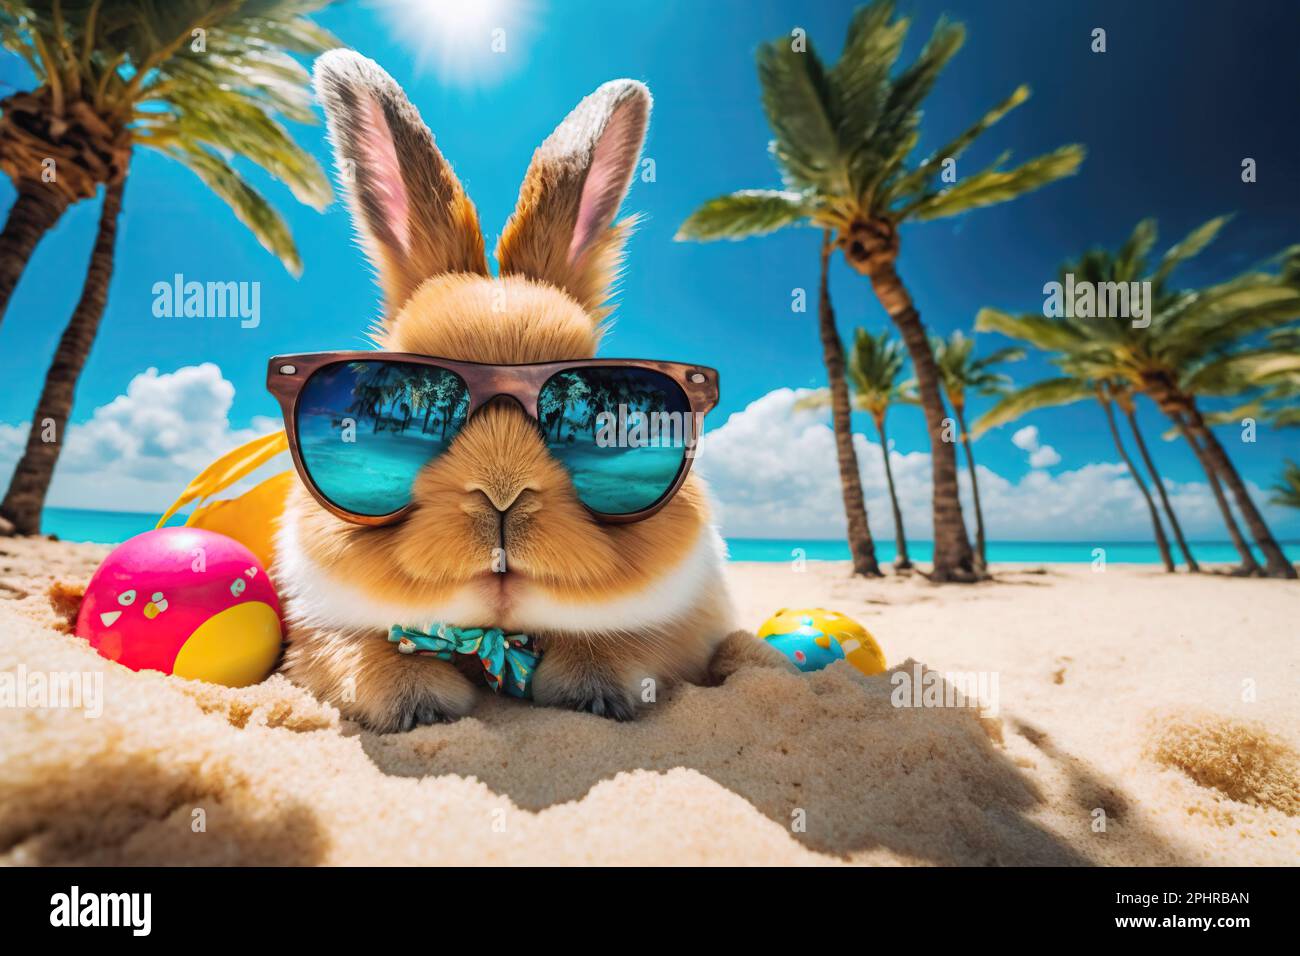 Cute Easter bunny and eggs on the sand beach with palm trees. Funny Easter concept Stock Photo